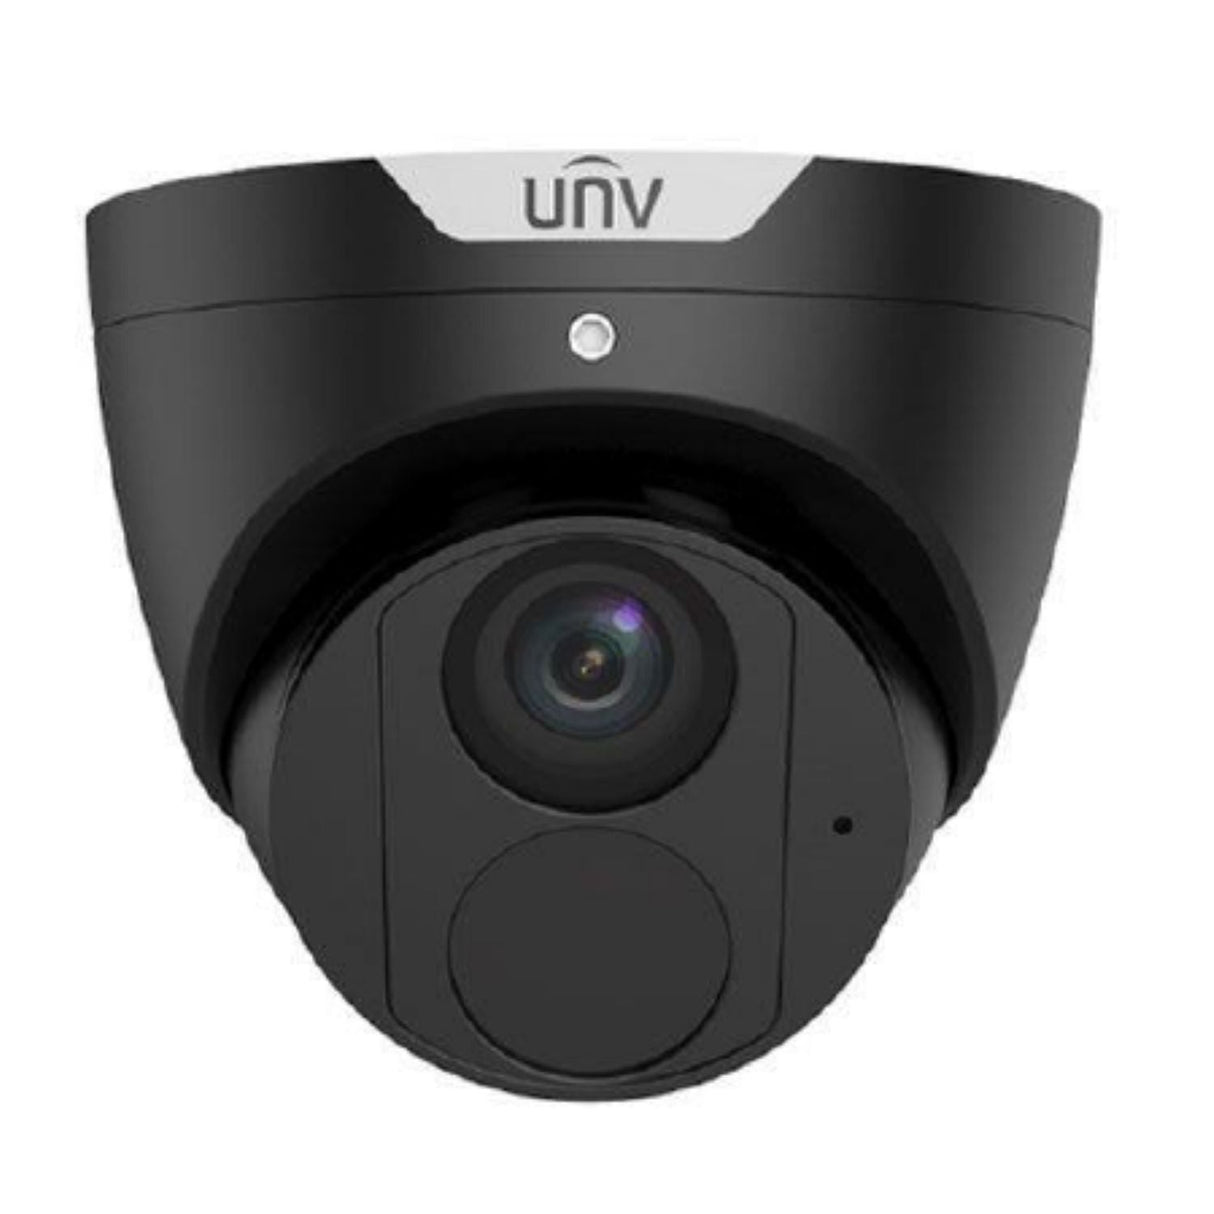 Uniview EasyStar Security System: 4x 6MP Turret Cams, 4CH 4K NVR + HDD